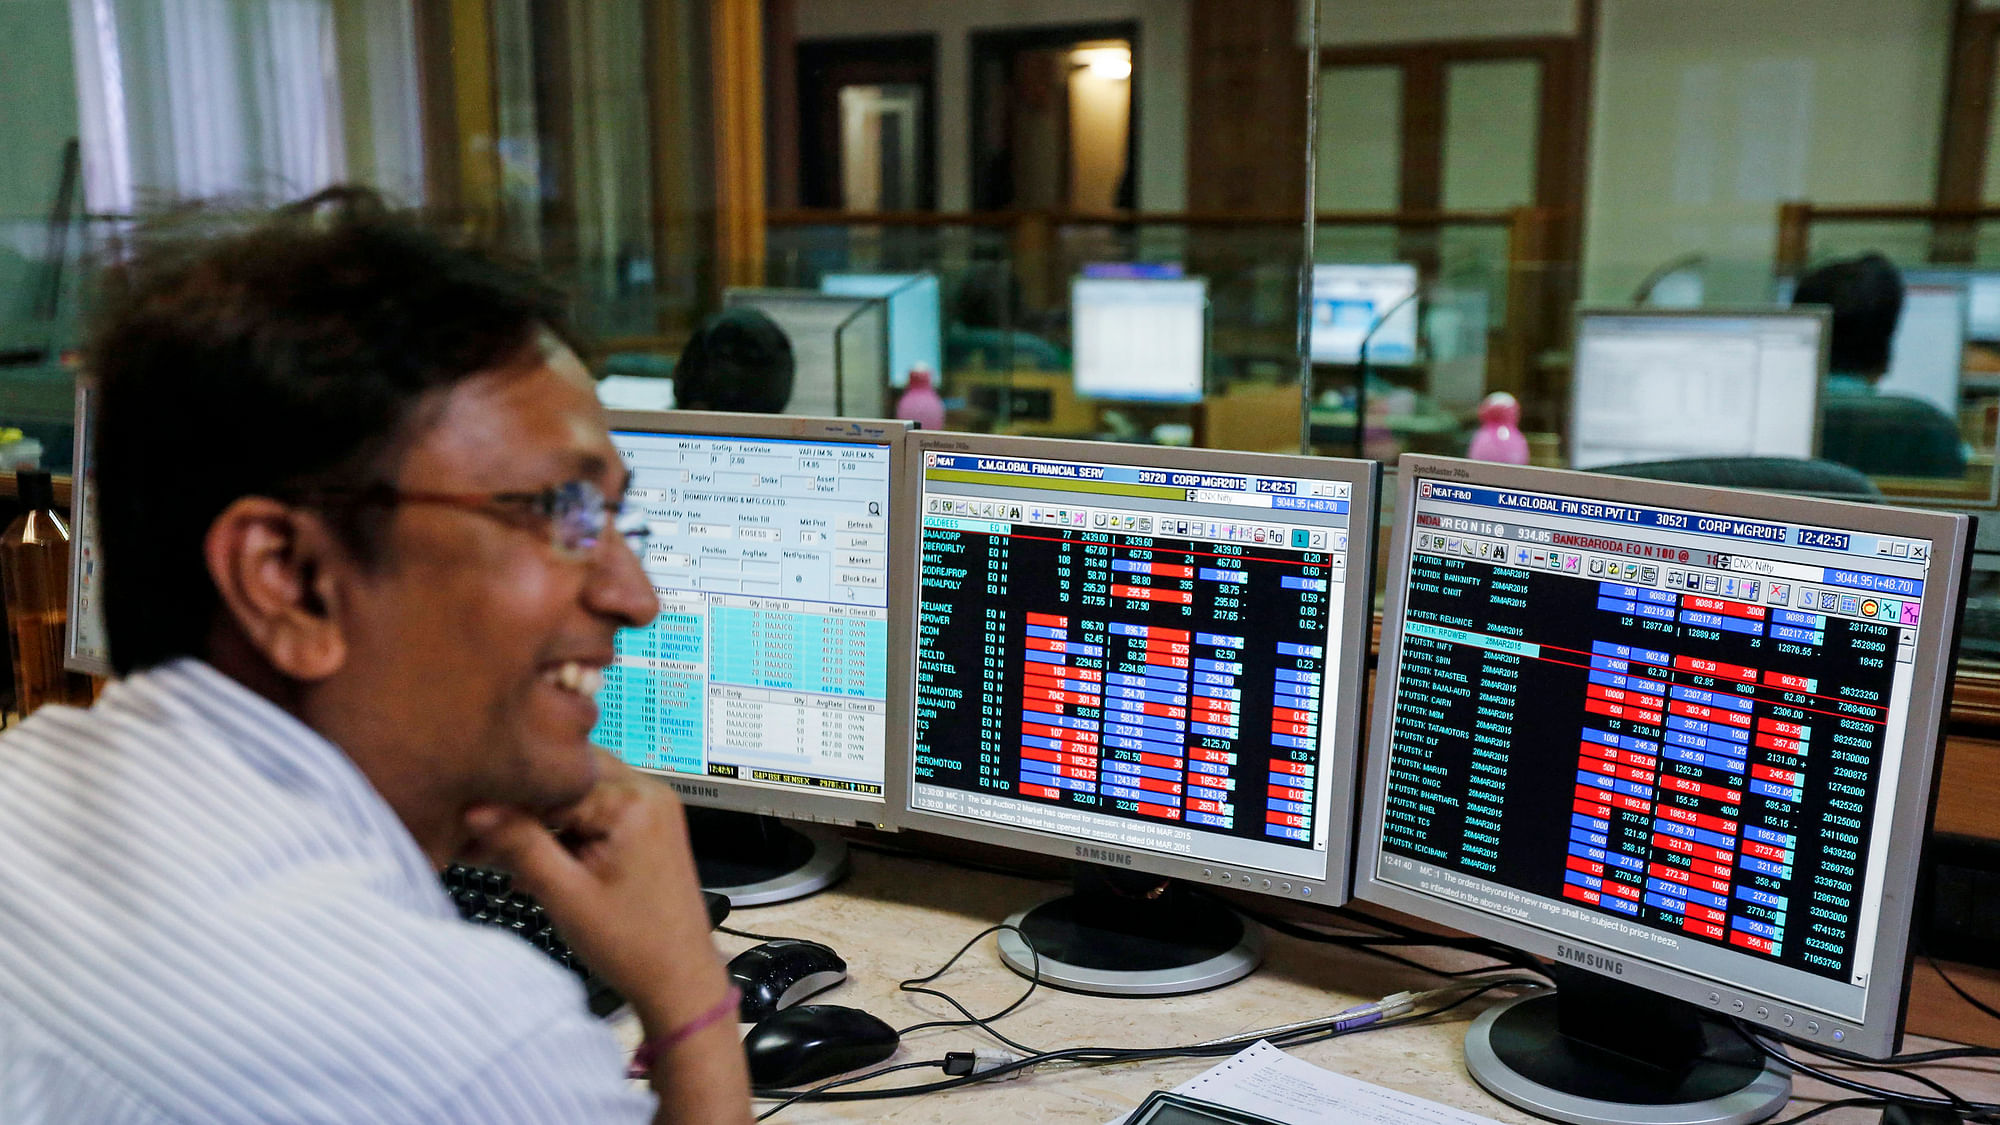  A broker laughs while speaking to a colleague, as they trade on their computer terminals at a stock brokerage firm in Mumbai, 4 March  2015.&nbsp;